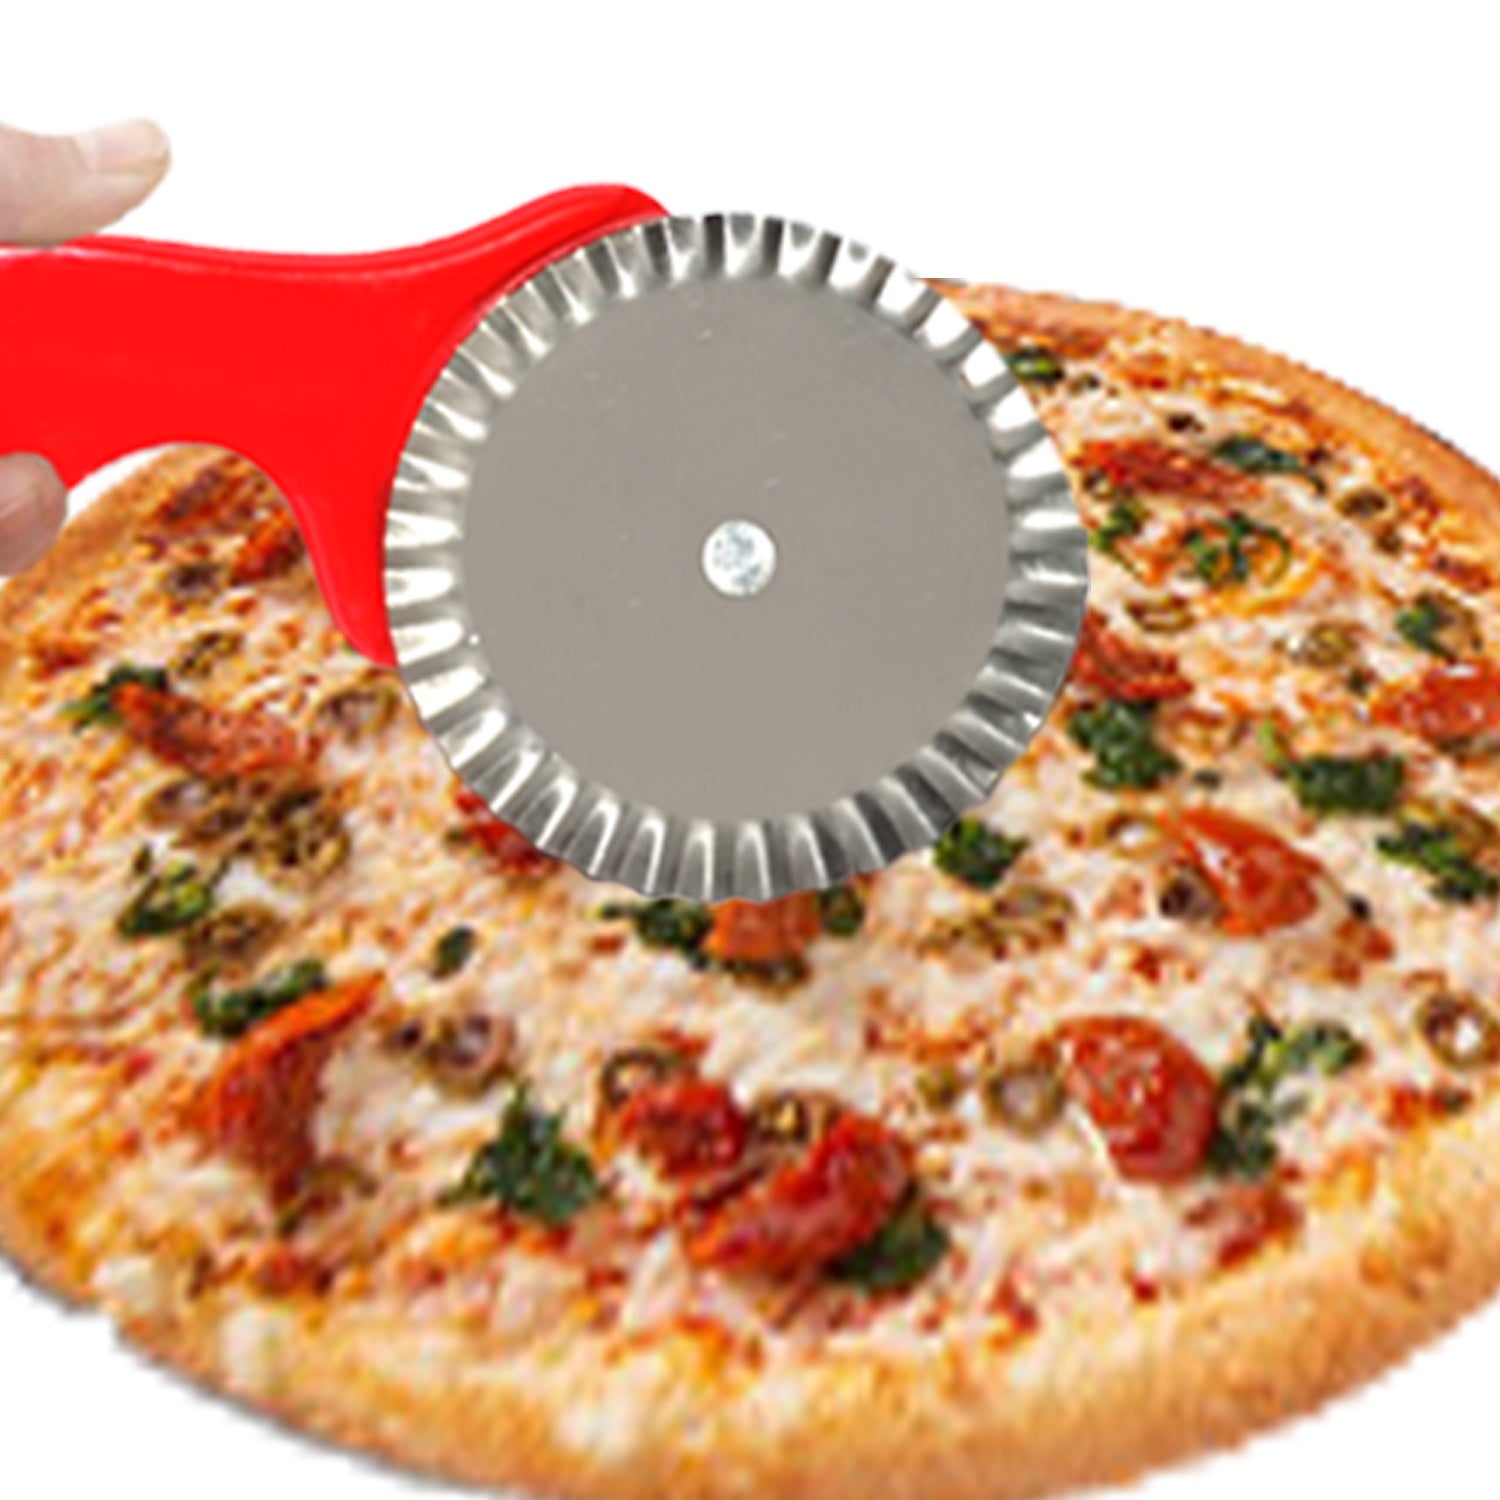 0725 Stainless Steel Pizza Cutter/Pastry Cutter/Sandwiches Cutter - India, 0.185 kgs